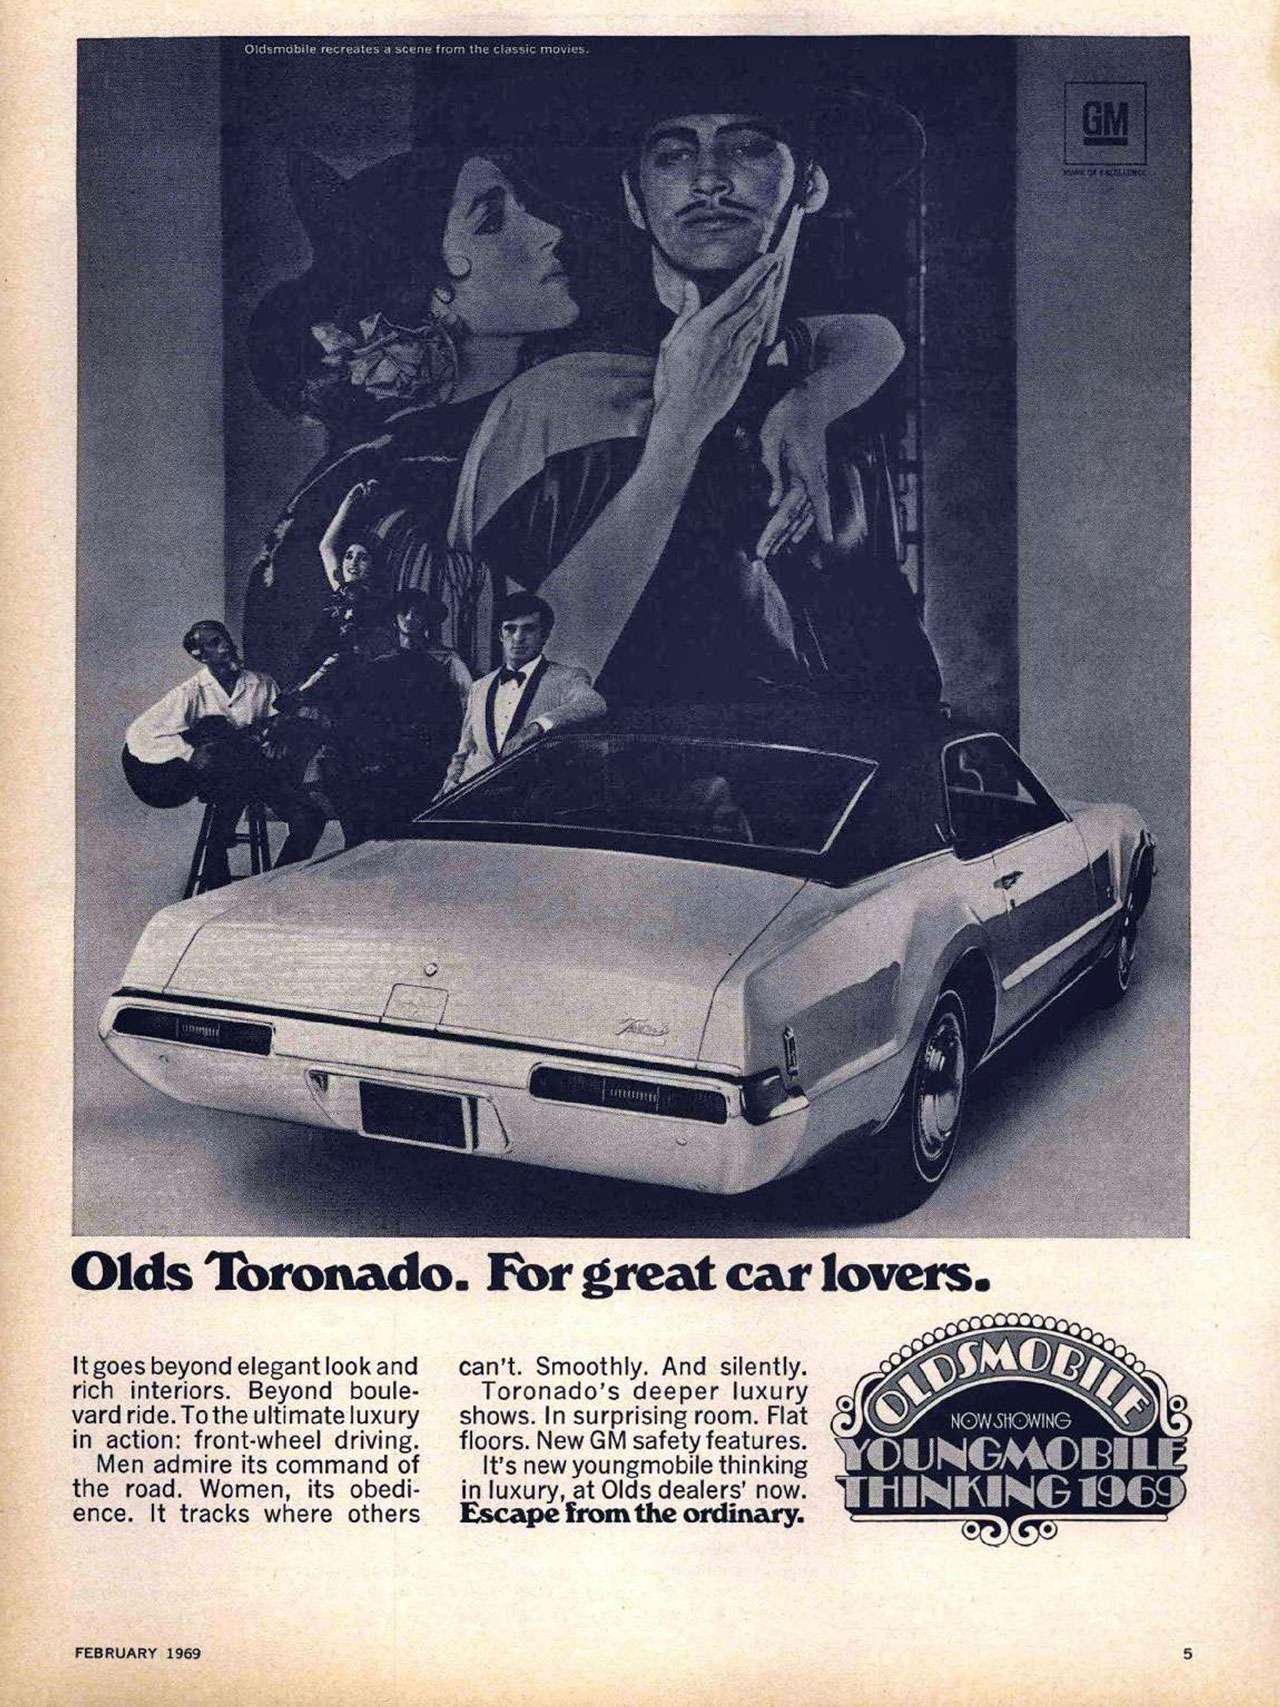 Olds Toronado. For great car lovers. It goes beyond elegant look and rich interiors. Beyond boule-vard ride. To the ultimate luxury in action: front-wheel driving. Men admire its command of the road. Women, its obedi-ence. It tracks where others can't. Smoothly. And silently. Toronado's deeper luxury shows. In surprising room. Flat floors. New GM safety features. It's new youngmobile thinking in luxury, at Olds dealers' now. Escape from the ordinary.